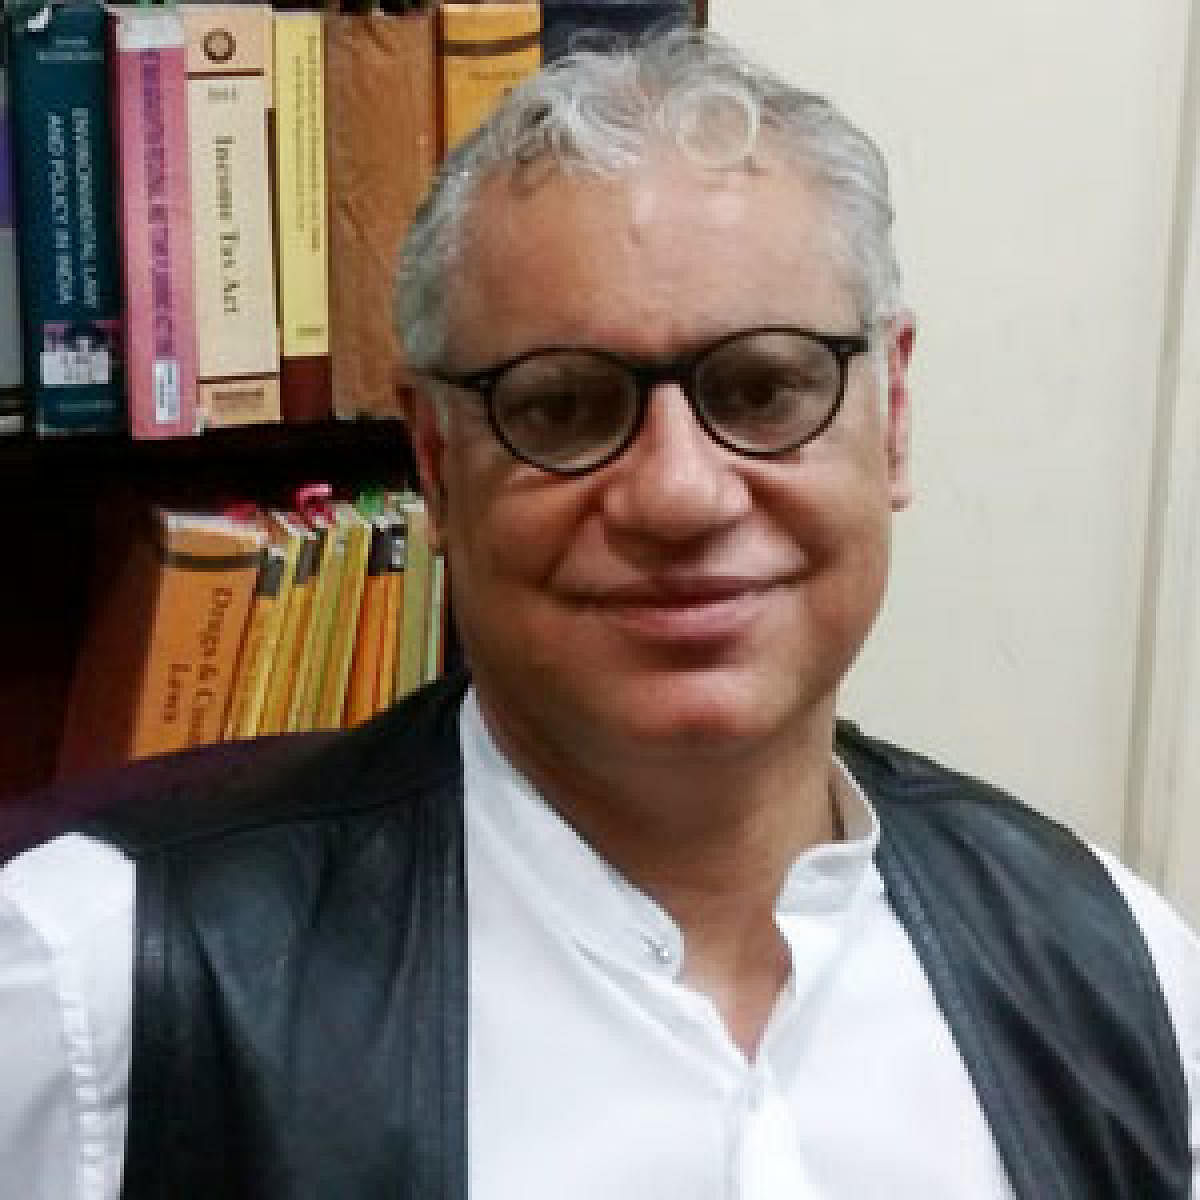 Anand Grover (DH Photo)